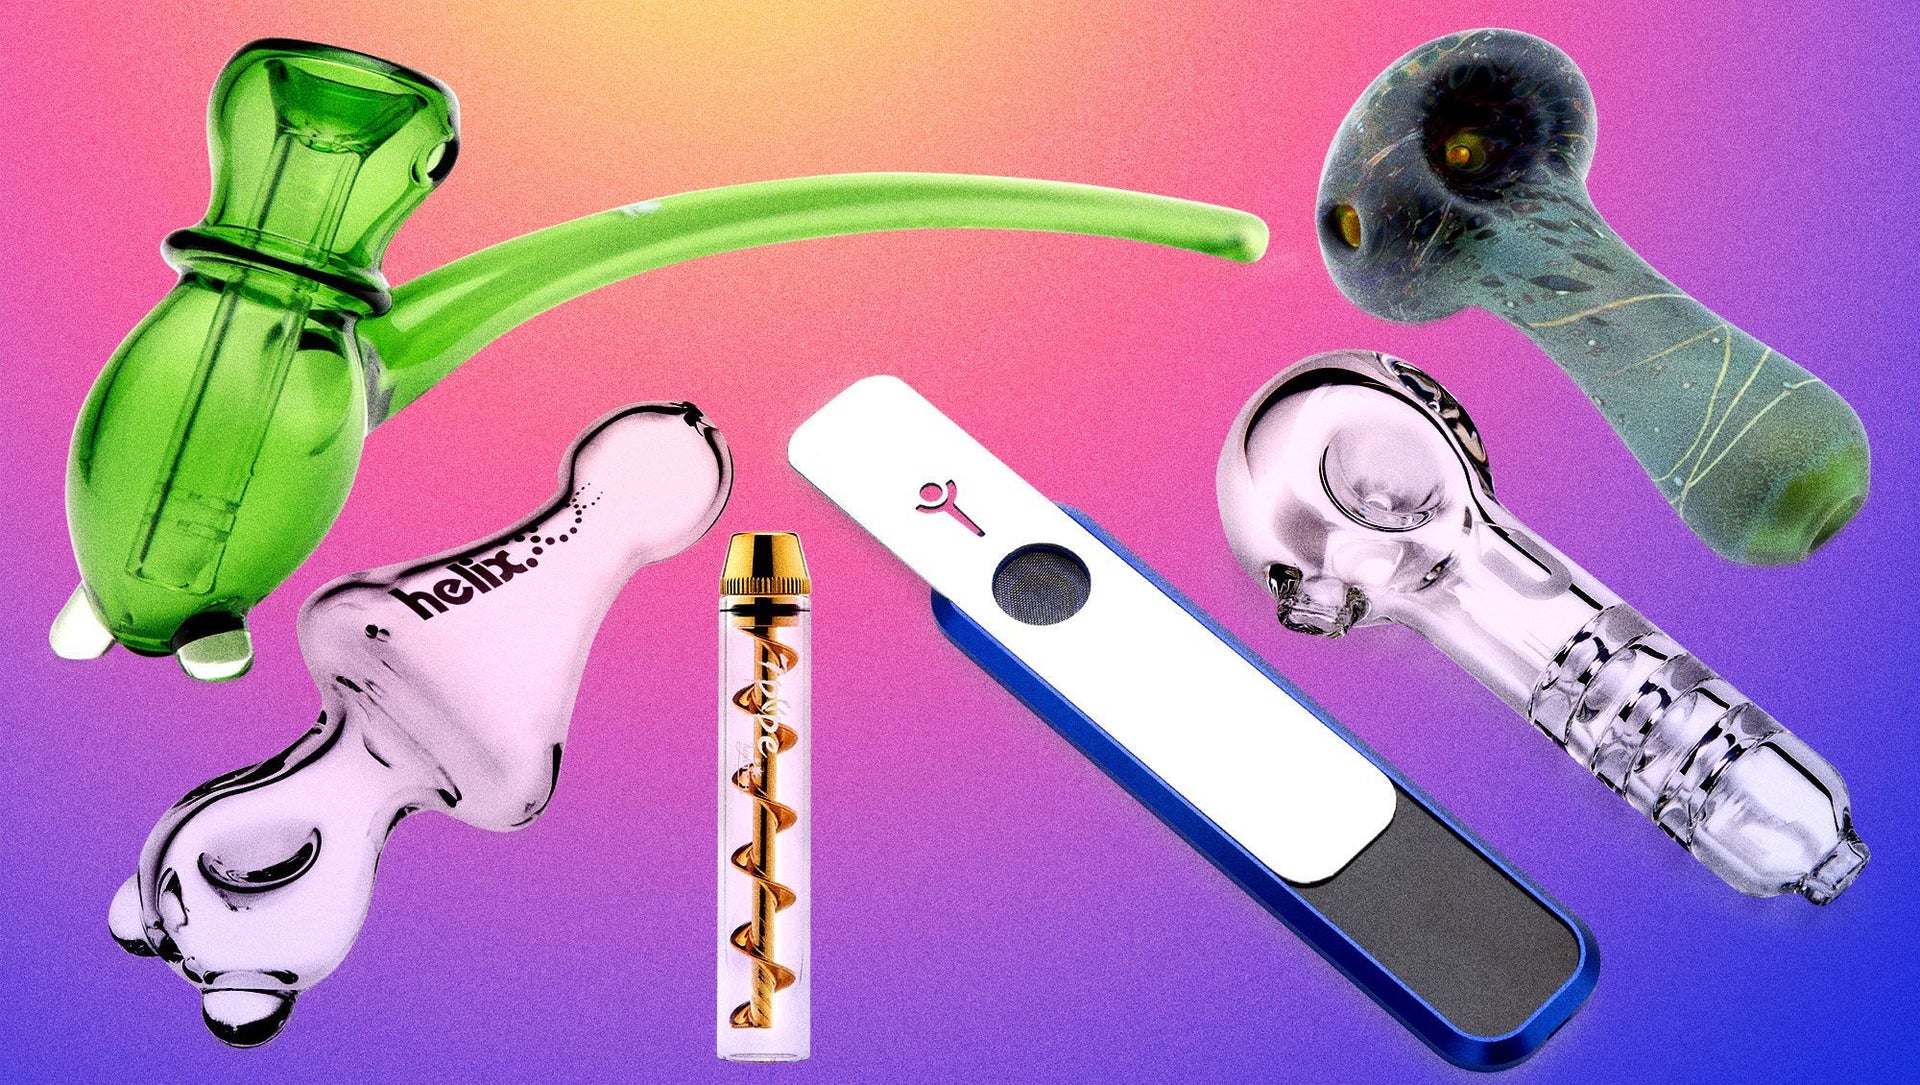 Best Hand Pipes for Smoking Weed: Our Top Picks of 2022